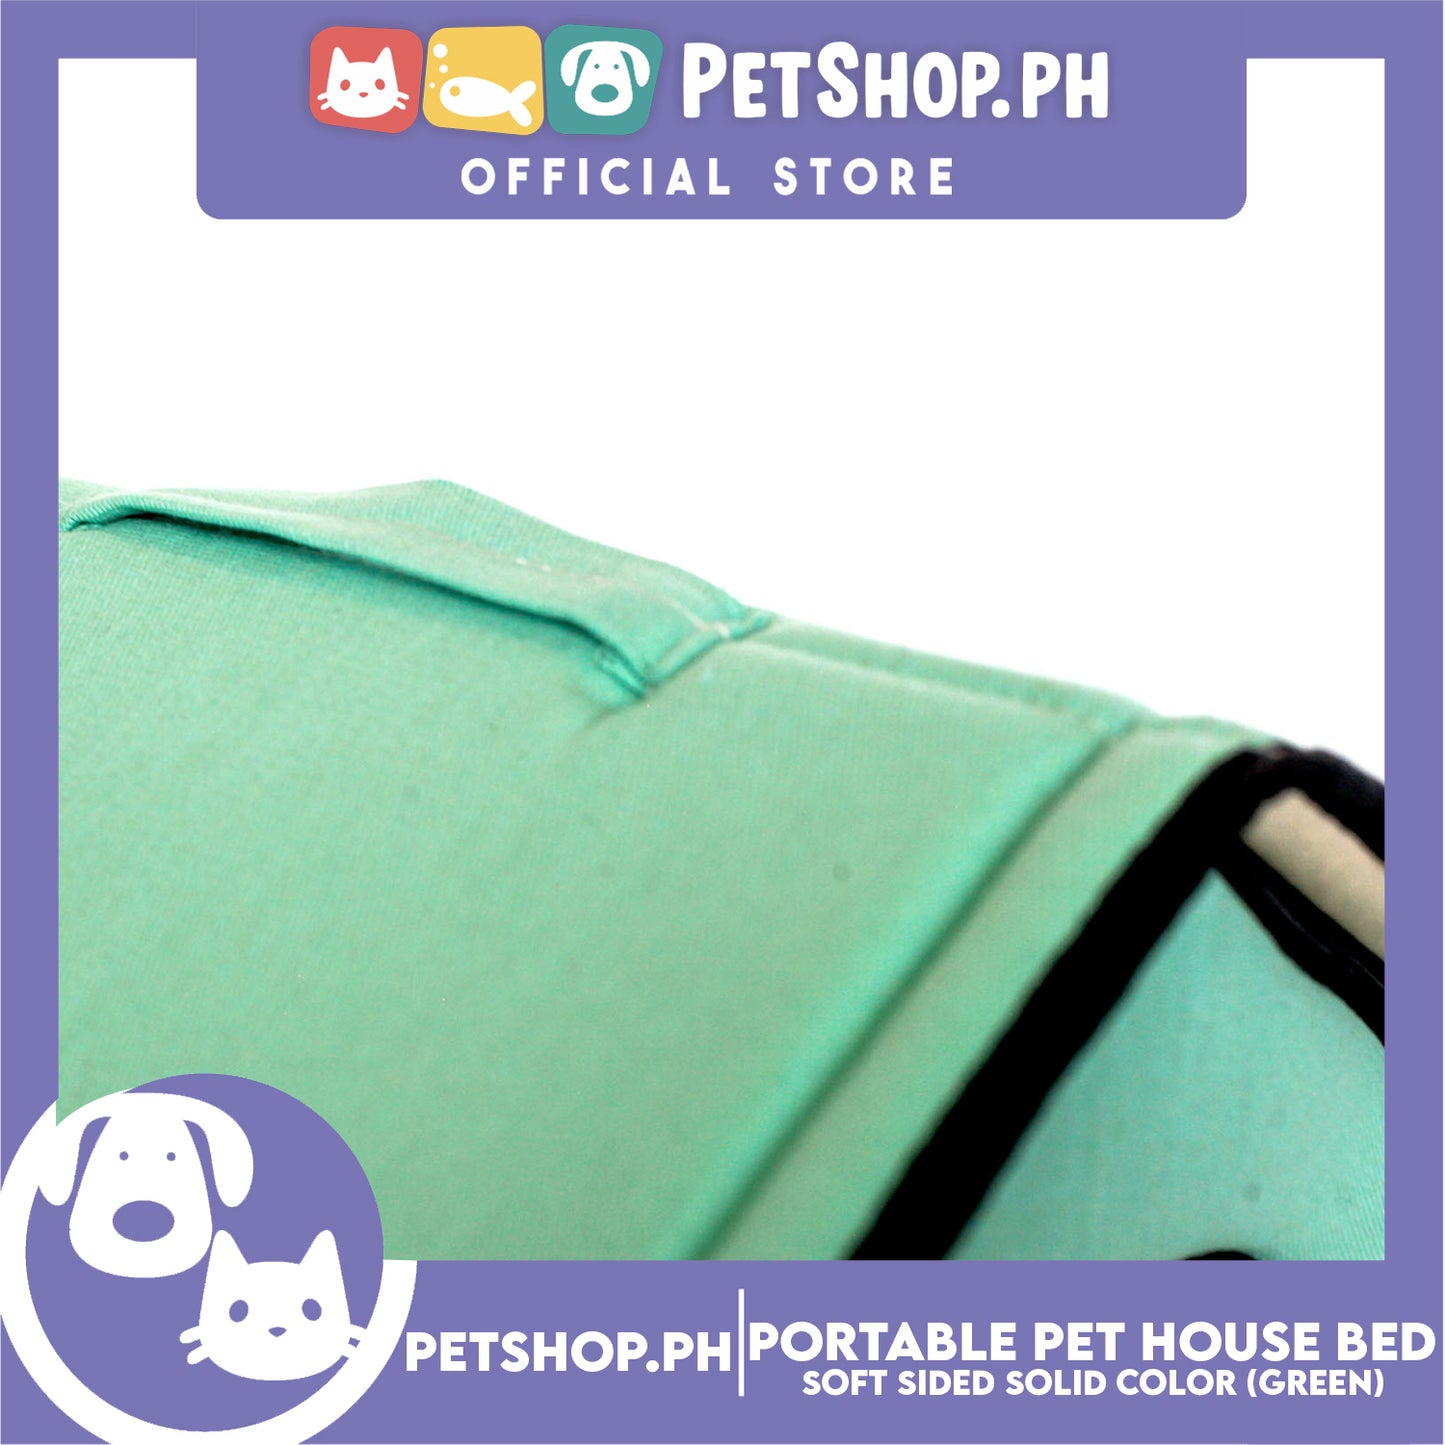 Portable Pet House Bed With Soft Sided Solid Color 30x33x32cm Medium (Mint Green)